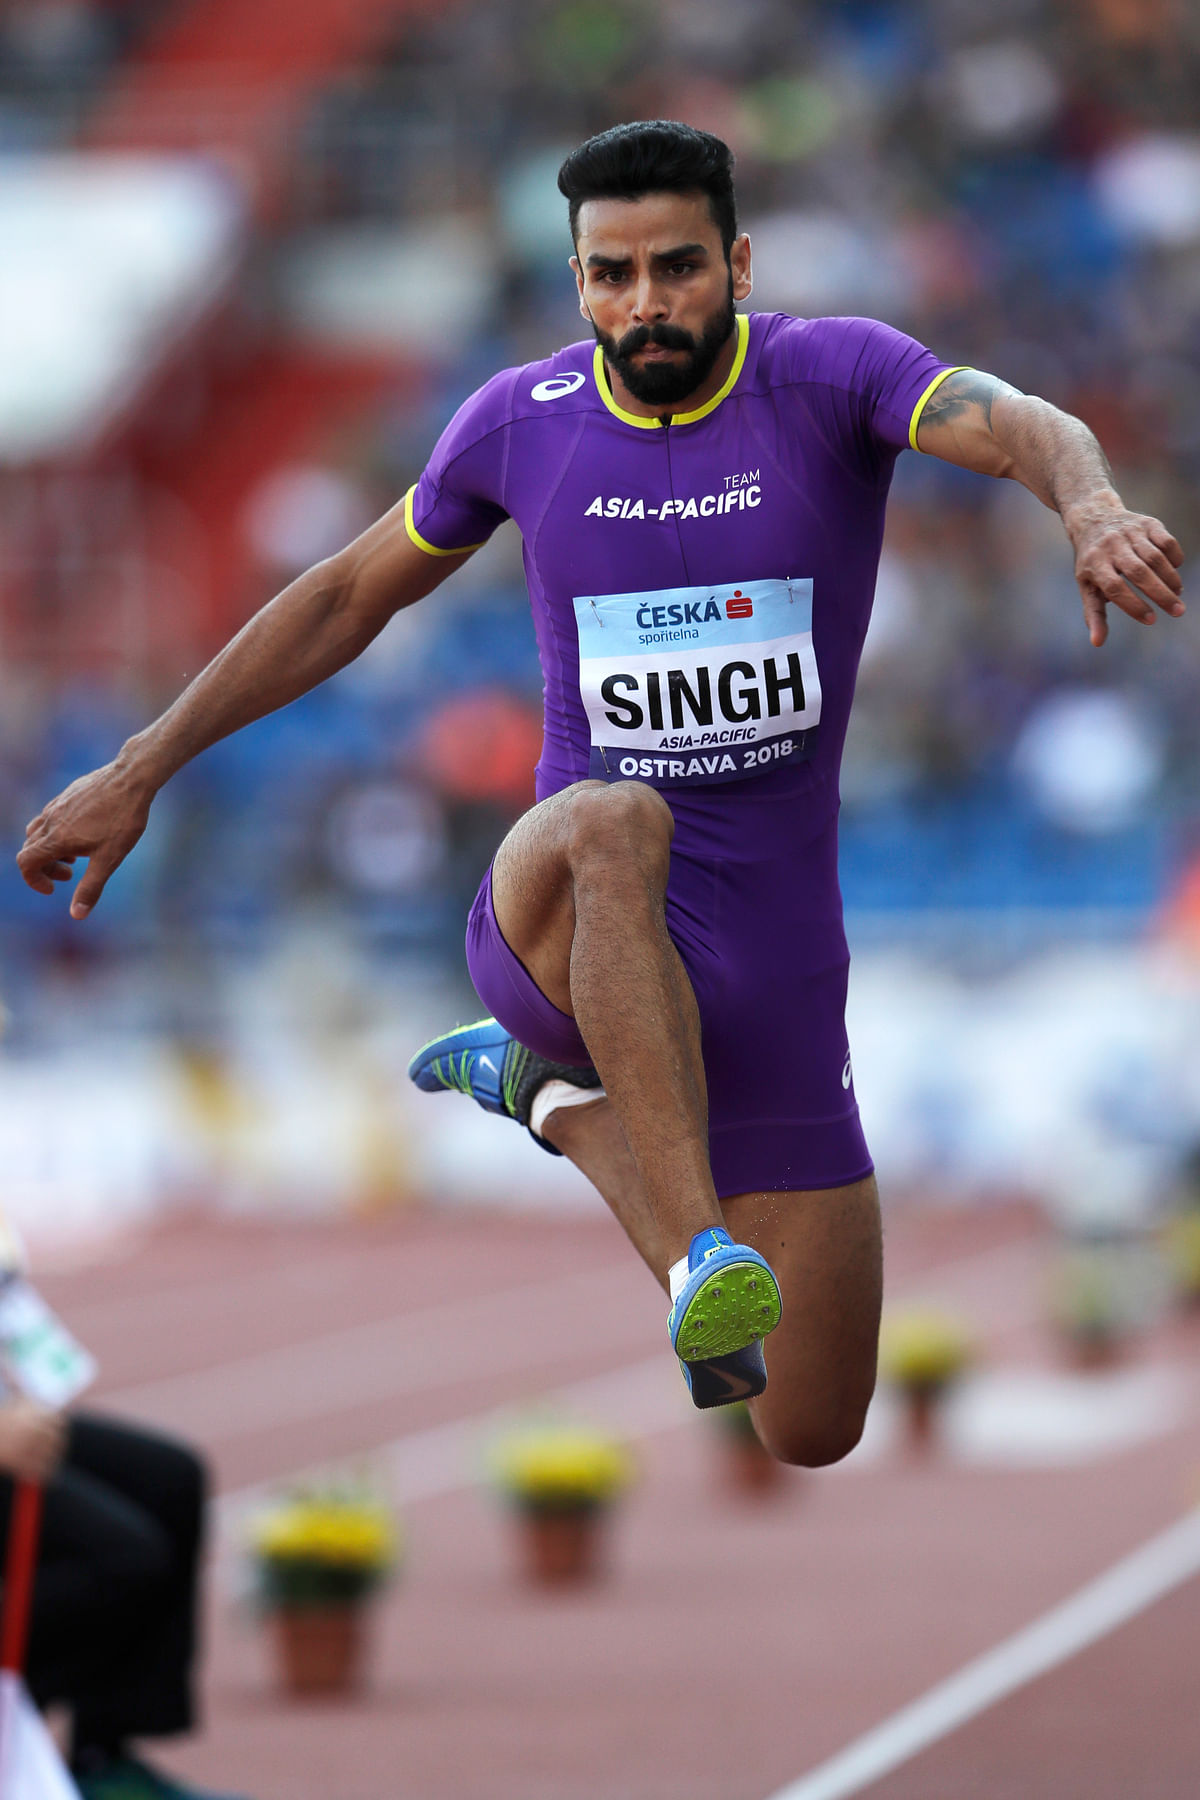 Triple jumper Arpinder Singh created history by becoming the first Indian to win a medal at IAAF Continental Cup.